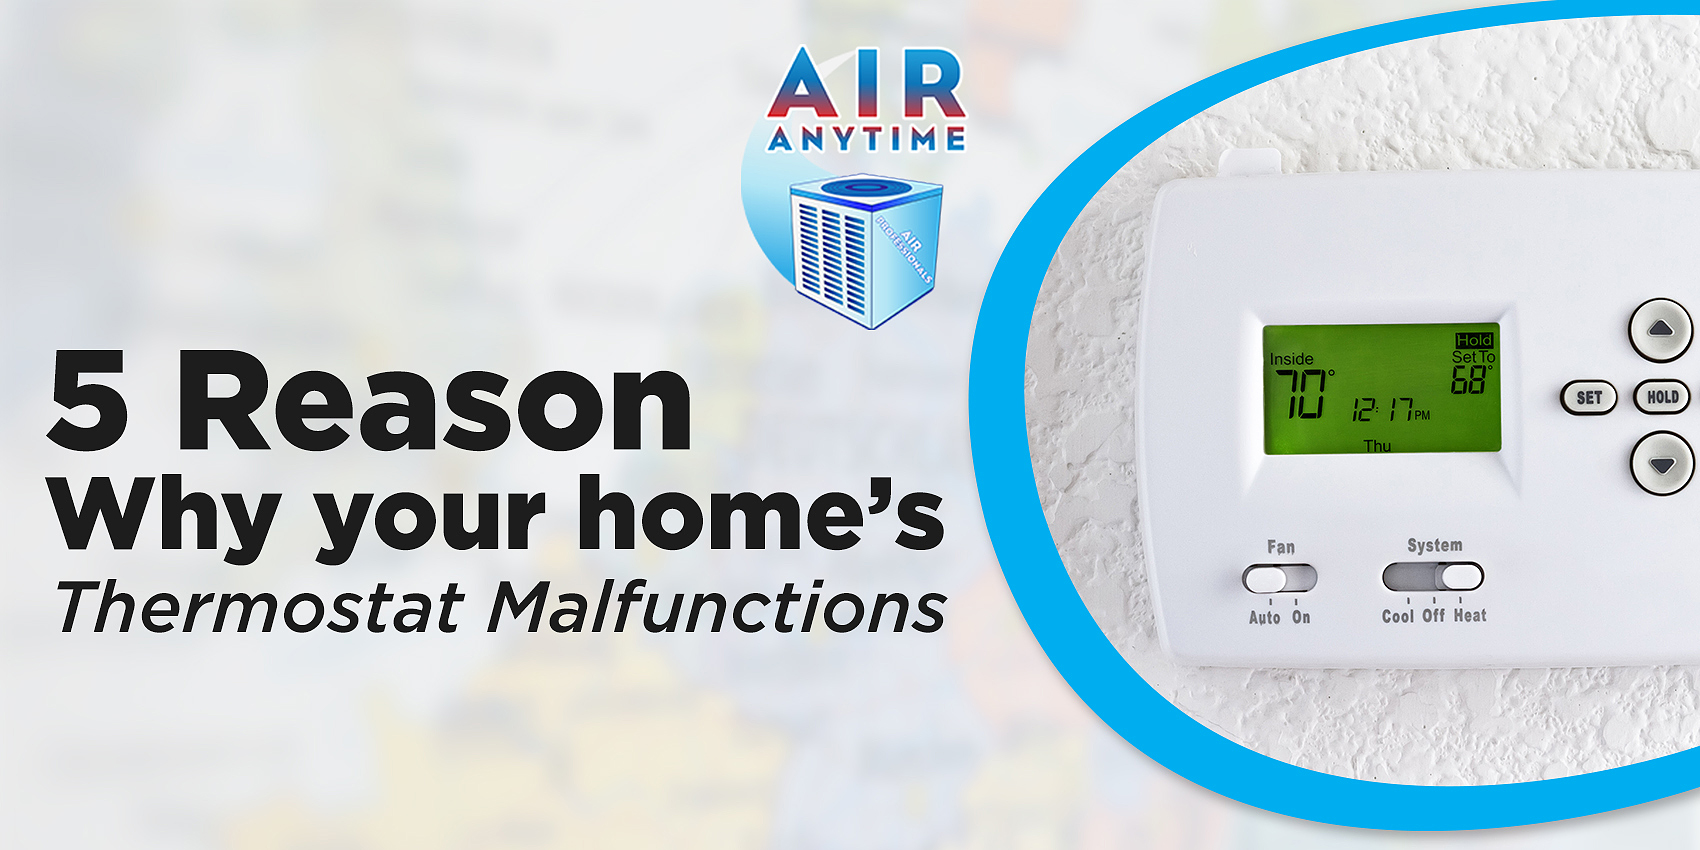 5 Reasons Why Your Home’s Thermostat Malfunctions